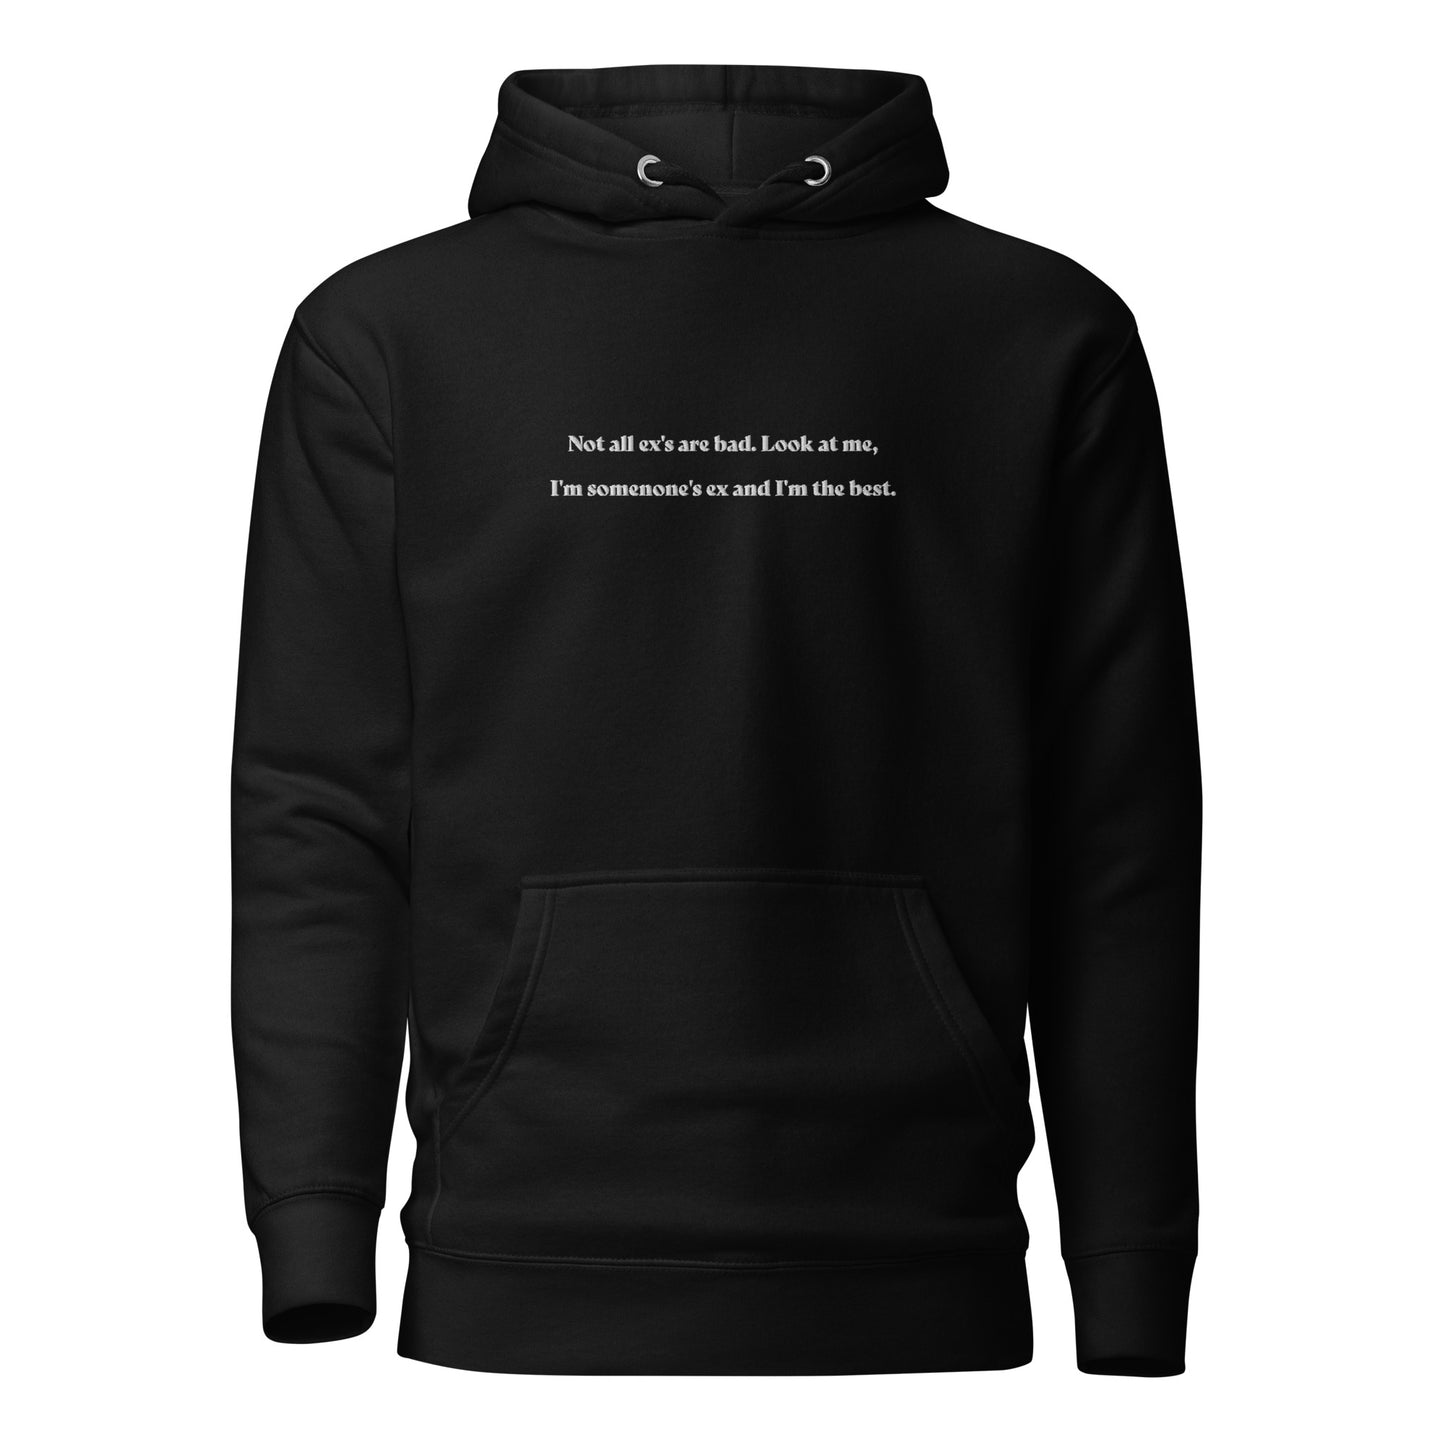 Not all ex's are bad - bestickter Hoodie